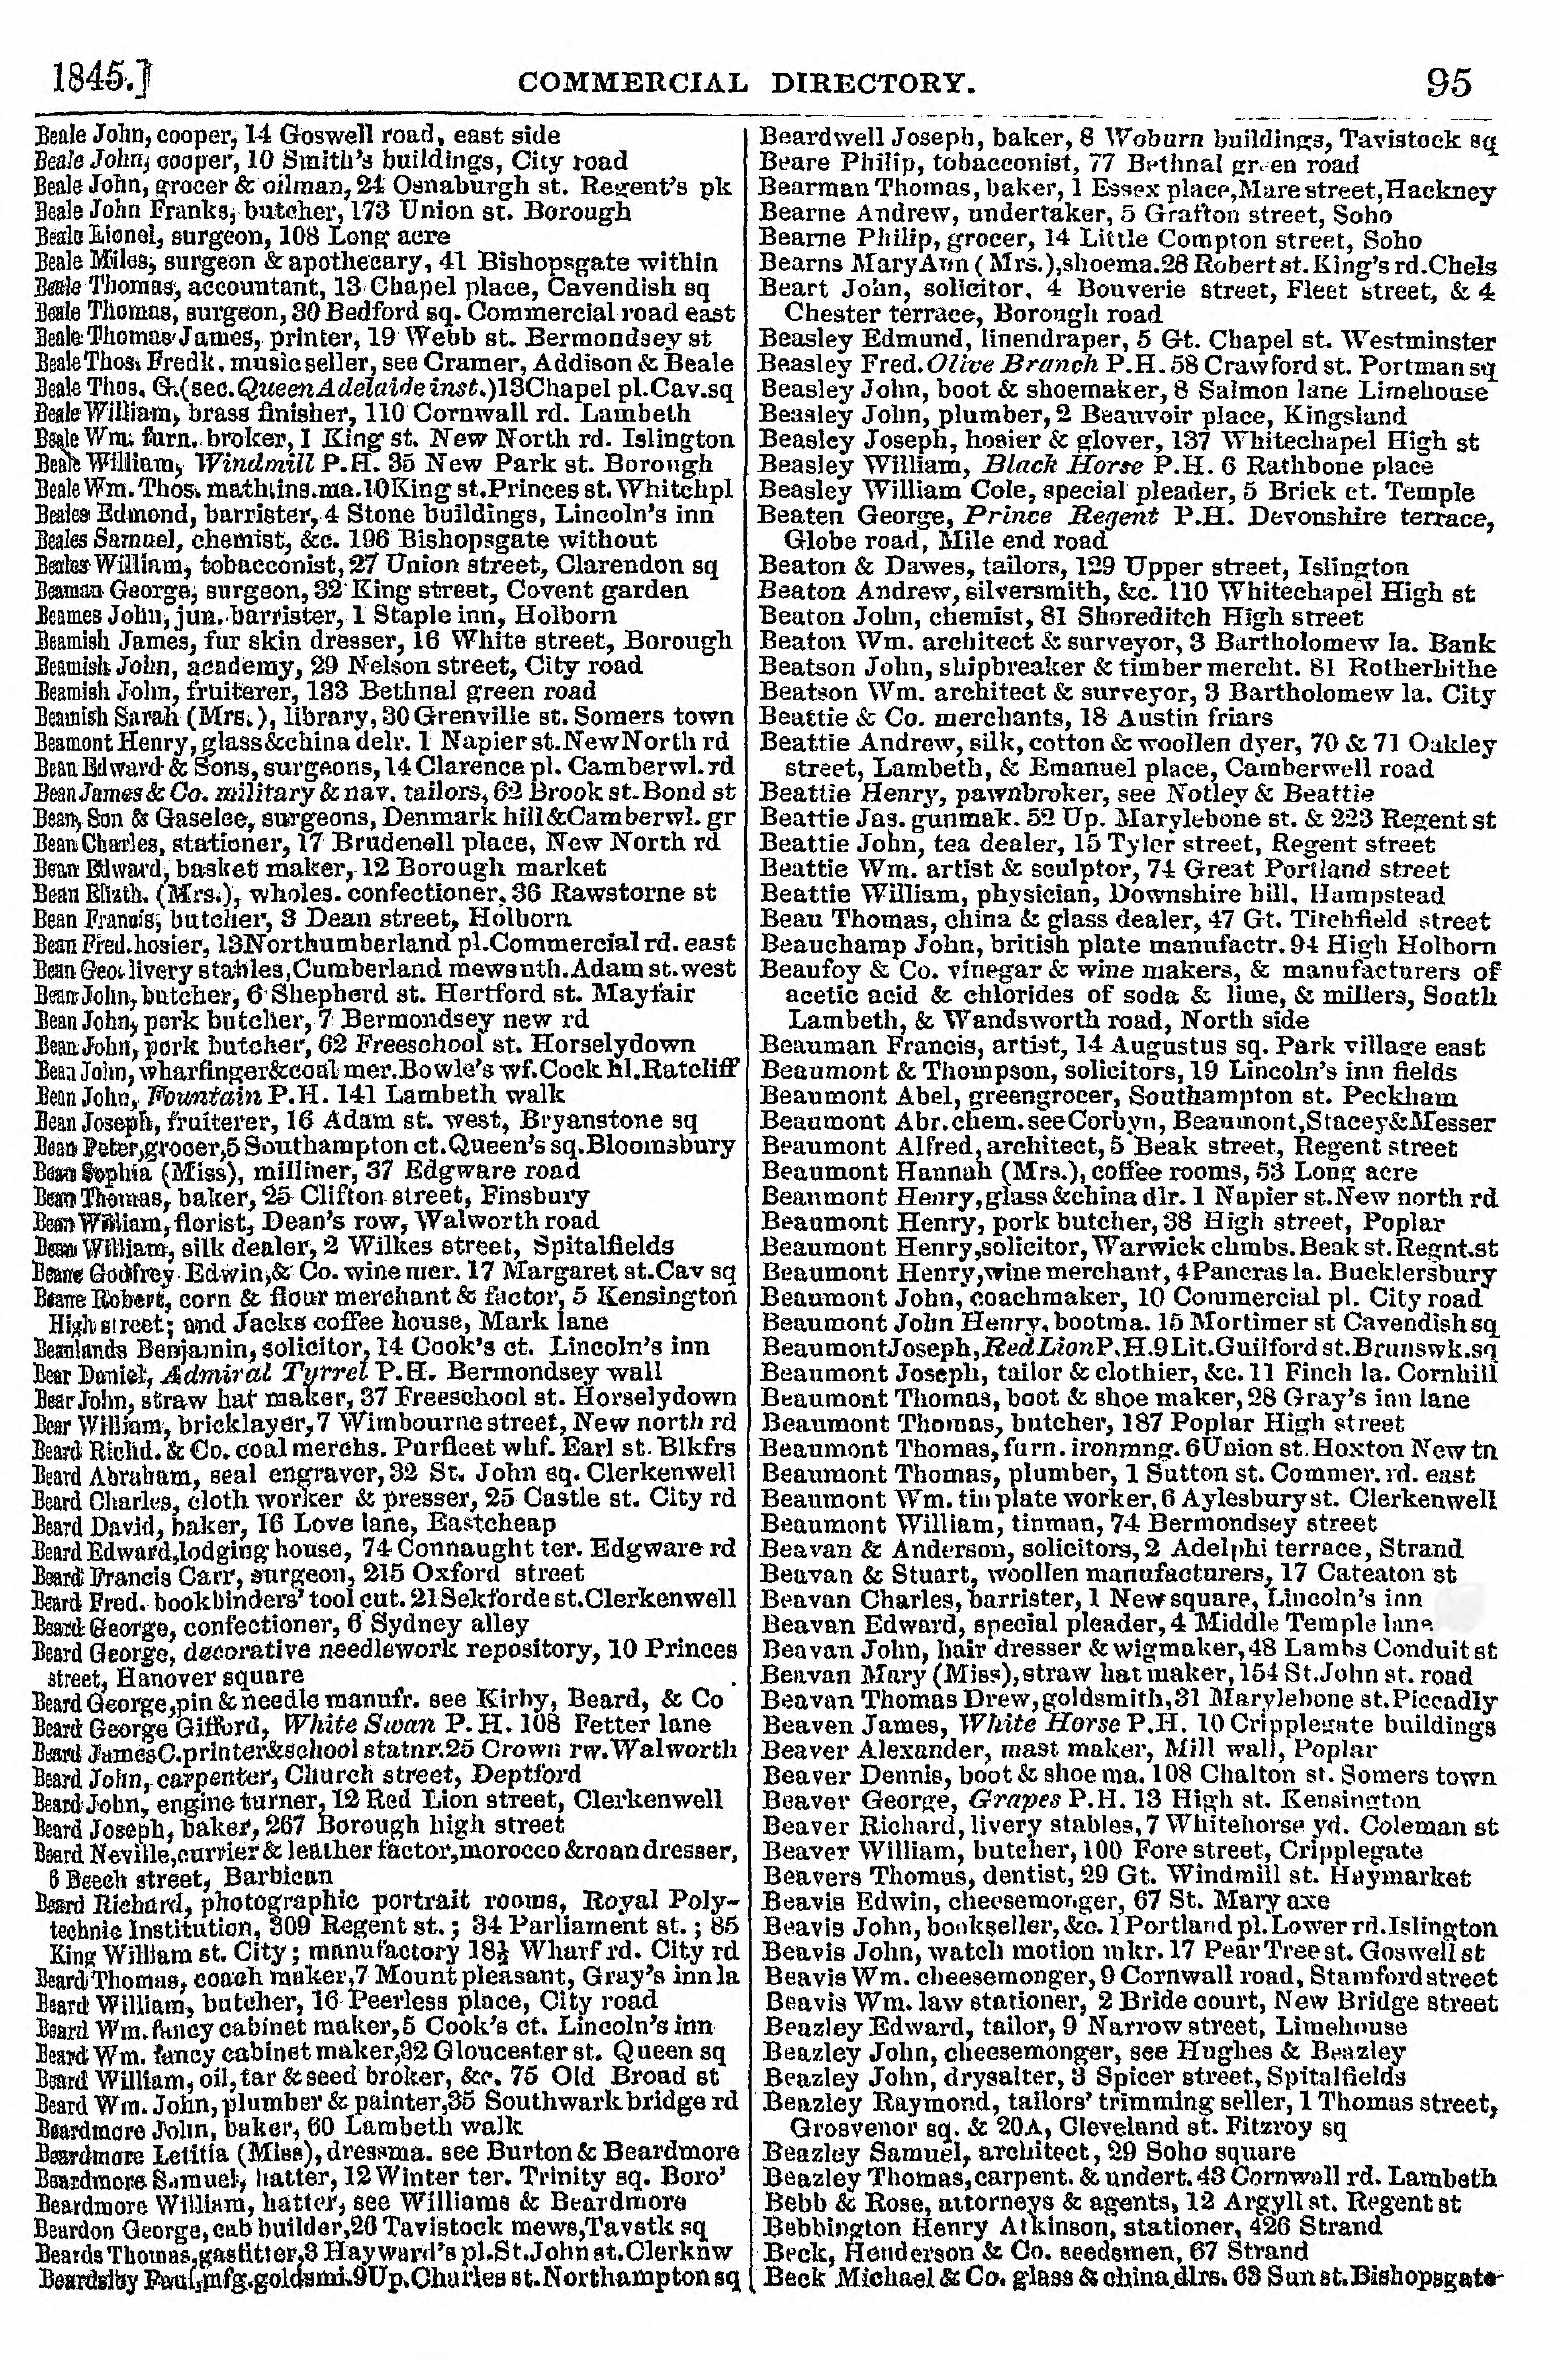 Thomas Bearman in the 1845 Post Office directory